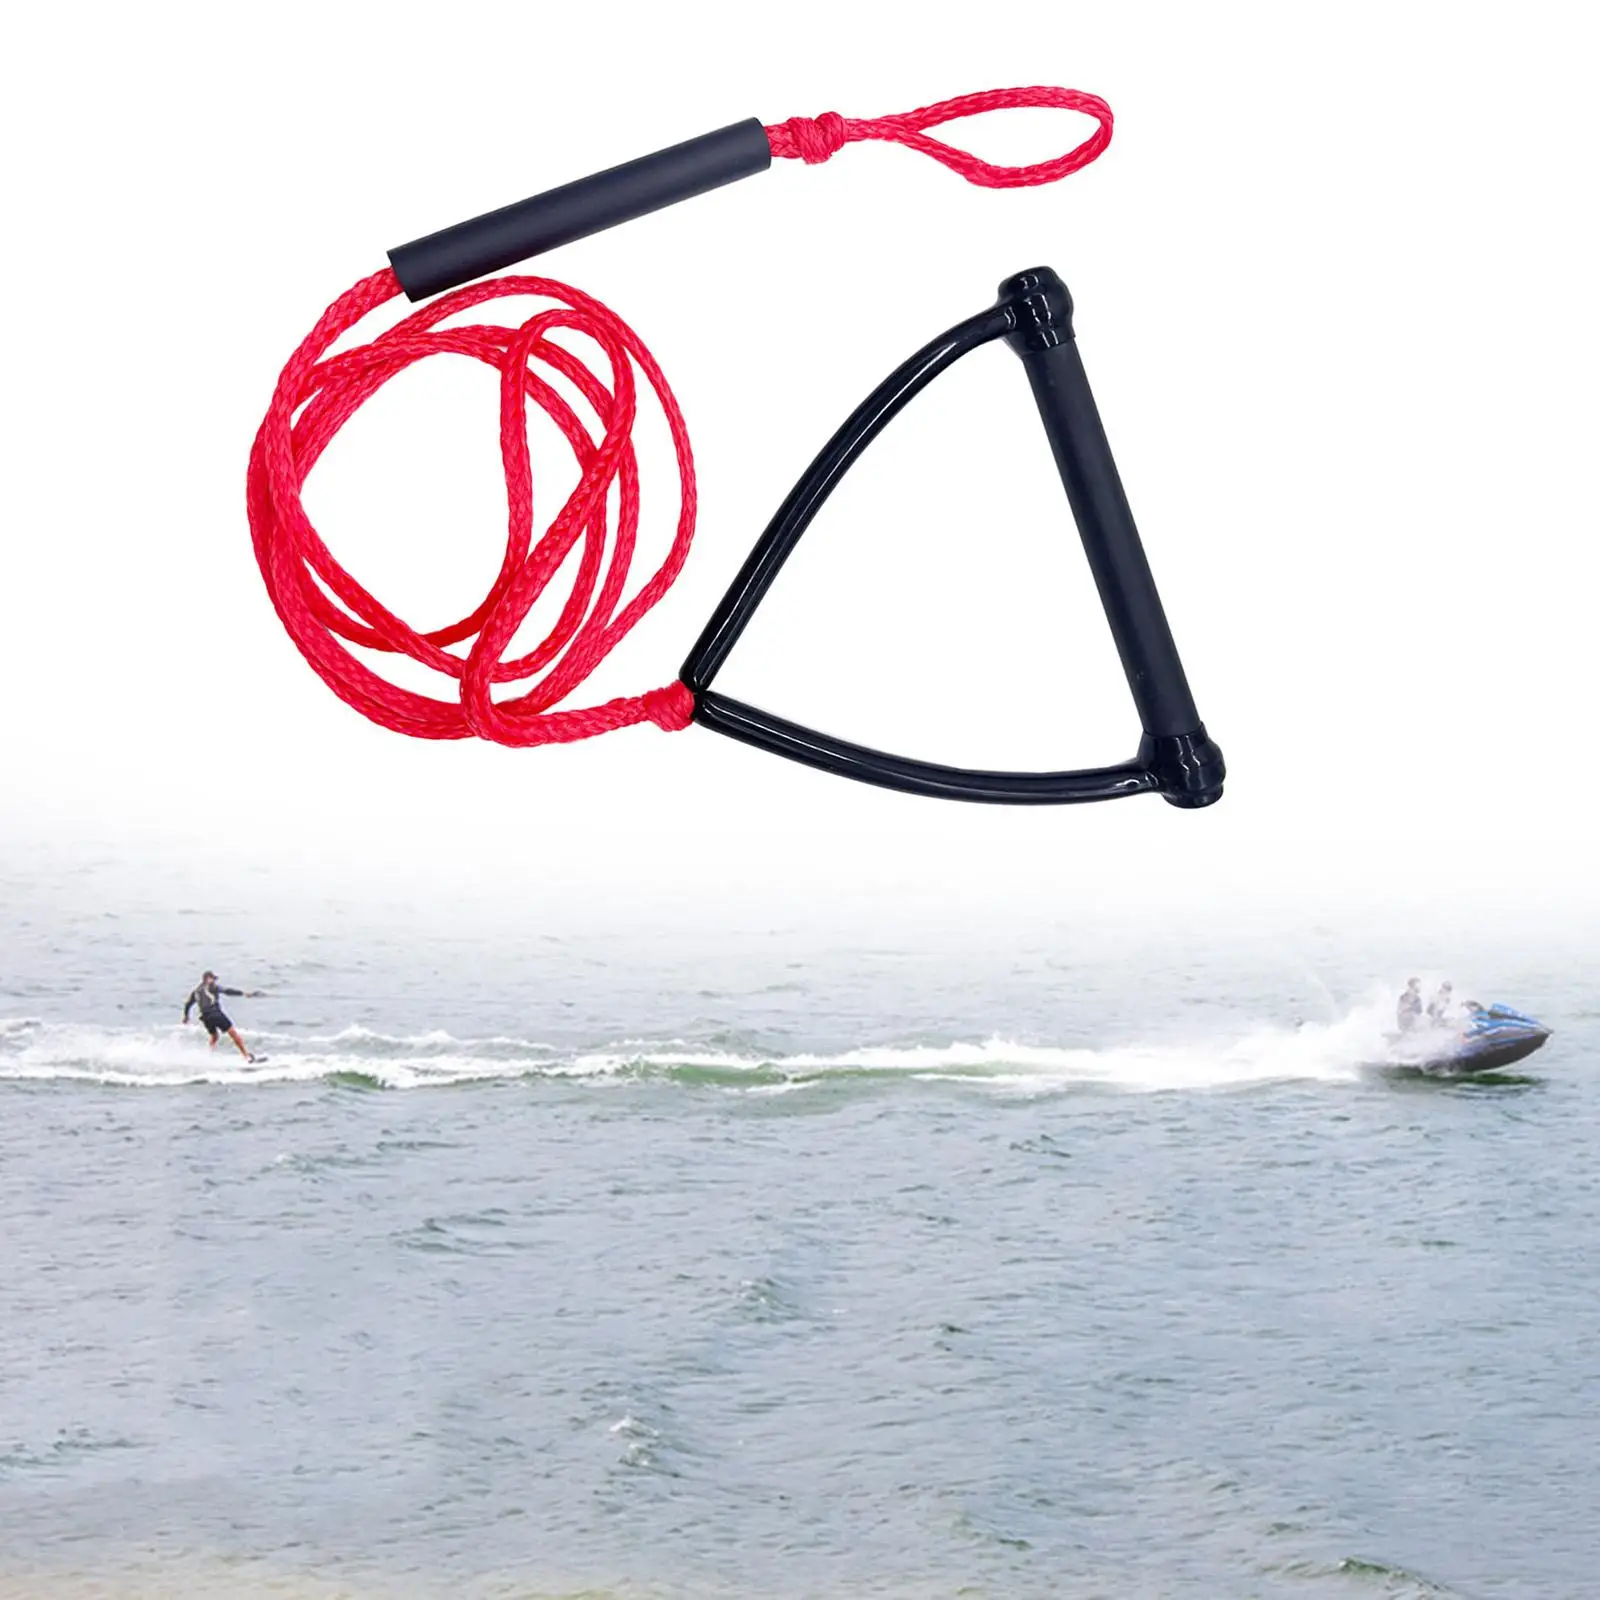 Wake Board Water Ski Rope 7.3M Boat Surfing Rope Durable Portable Water Ski Tow Rope with Grip for Wakeboard Surfing Kneeboard